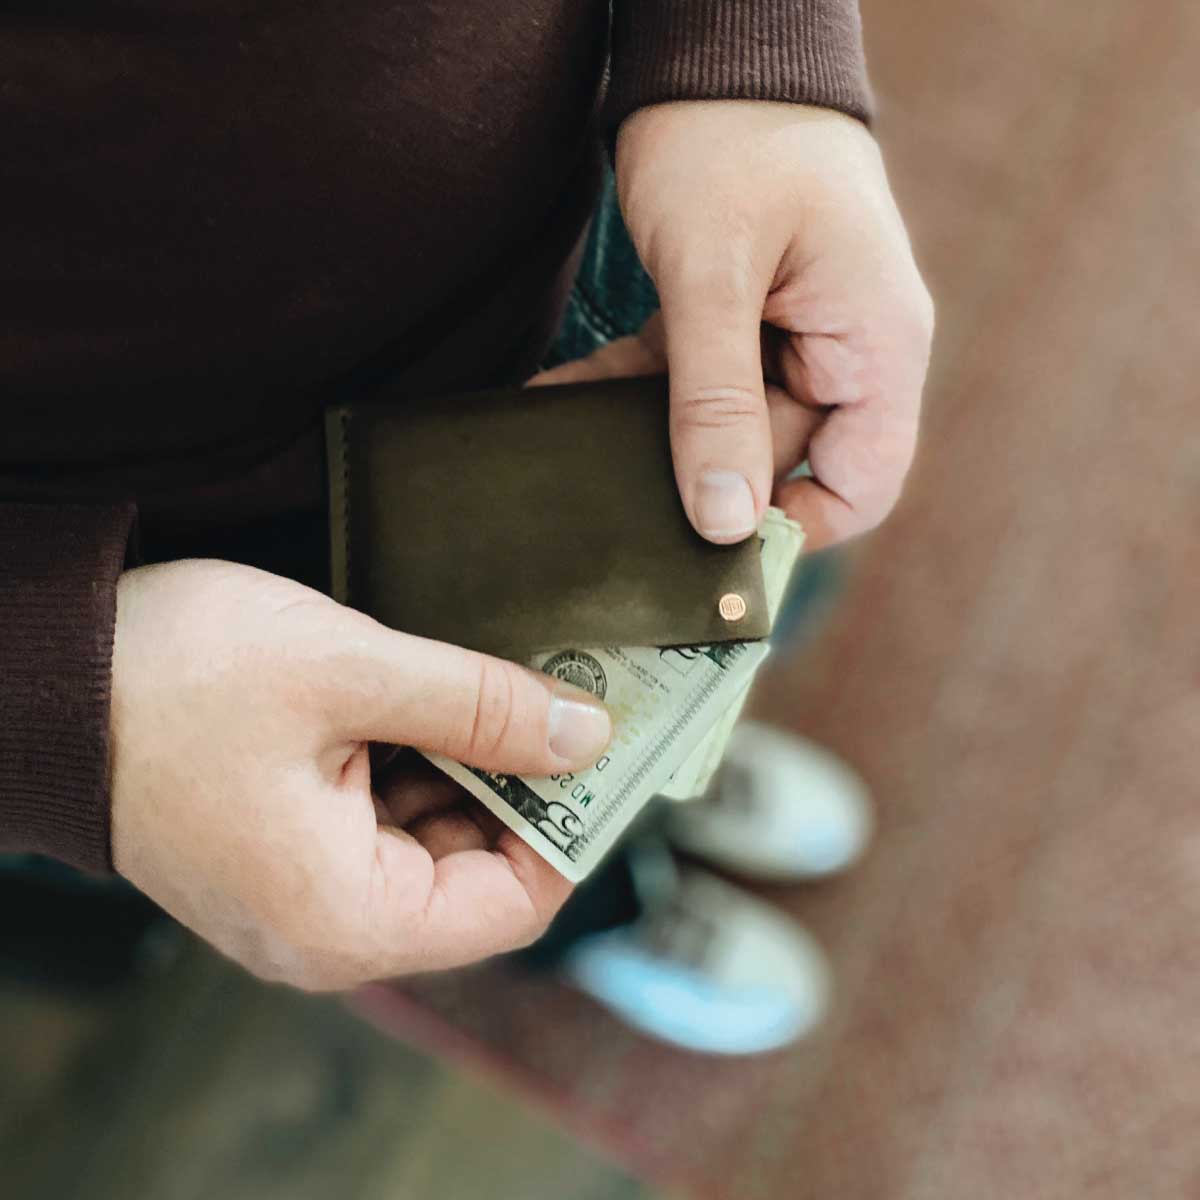 Handmade Leather Minimalist Wallet - Made in USA